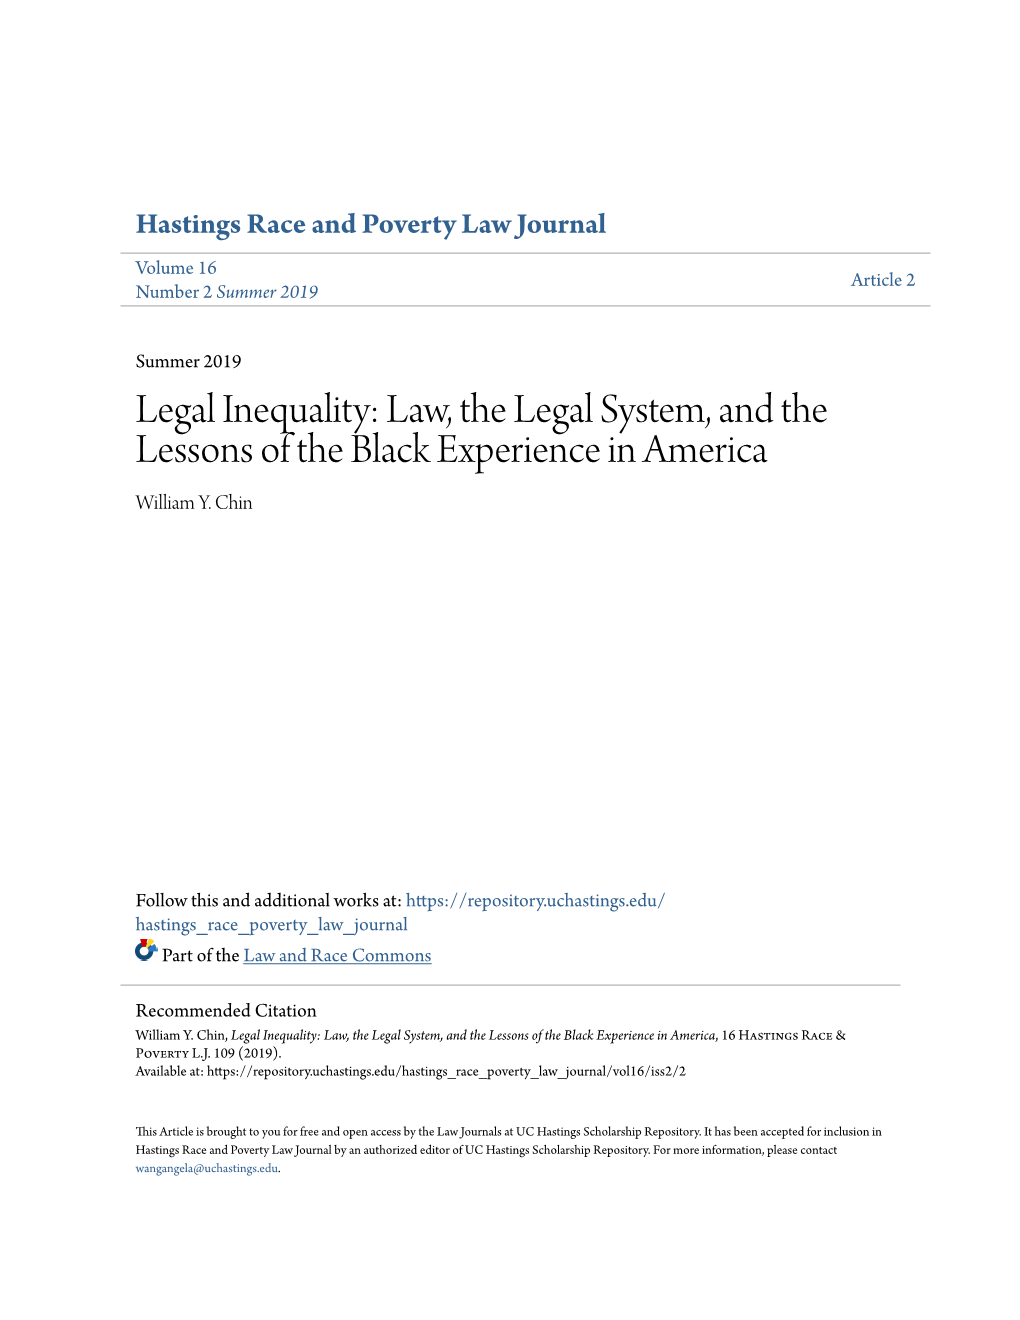 Law, the Legal System, and the Lessons of the Black Experience in America William Y